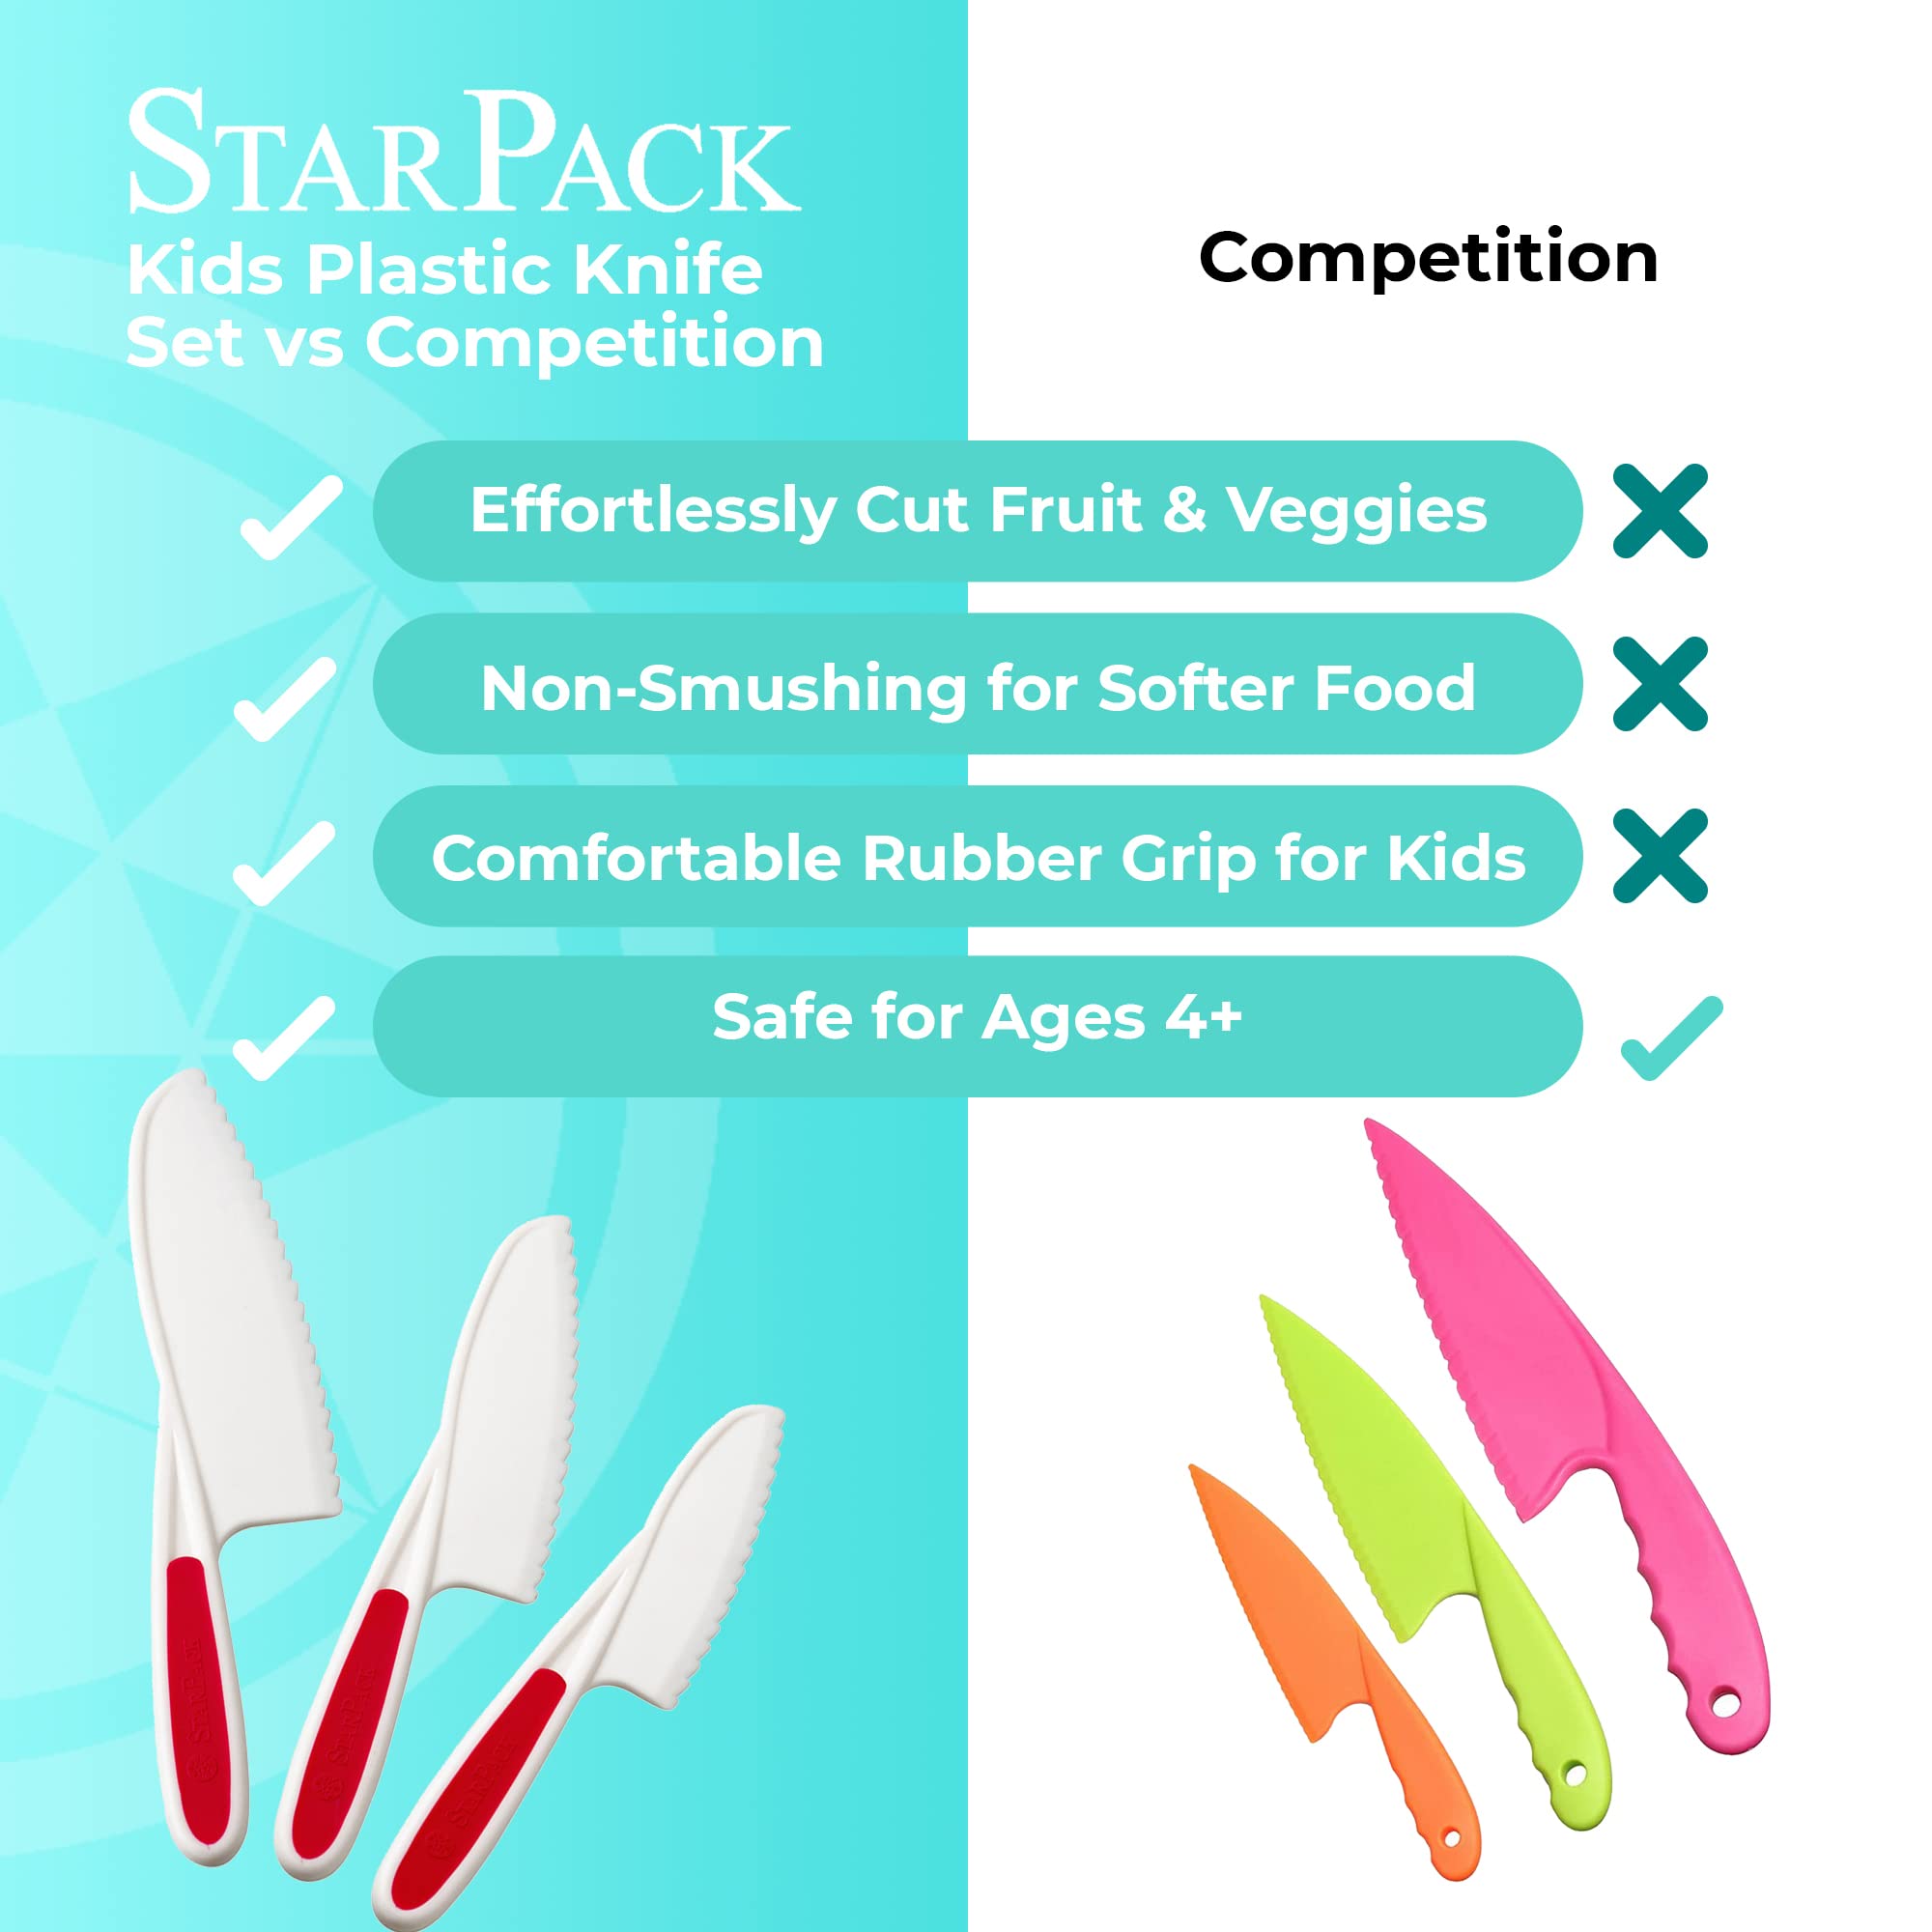 StarPack Kids Knife Set of 3 & 4x Sandwich Cutters for Kids - Toddler Knife Set & Fun Sandwich Cutters for Kids - Kids Knives for Real Cooking & 4x cookie cutters/sandwich cutters (Cherry Red)